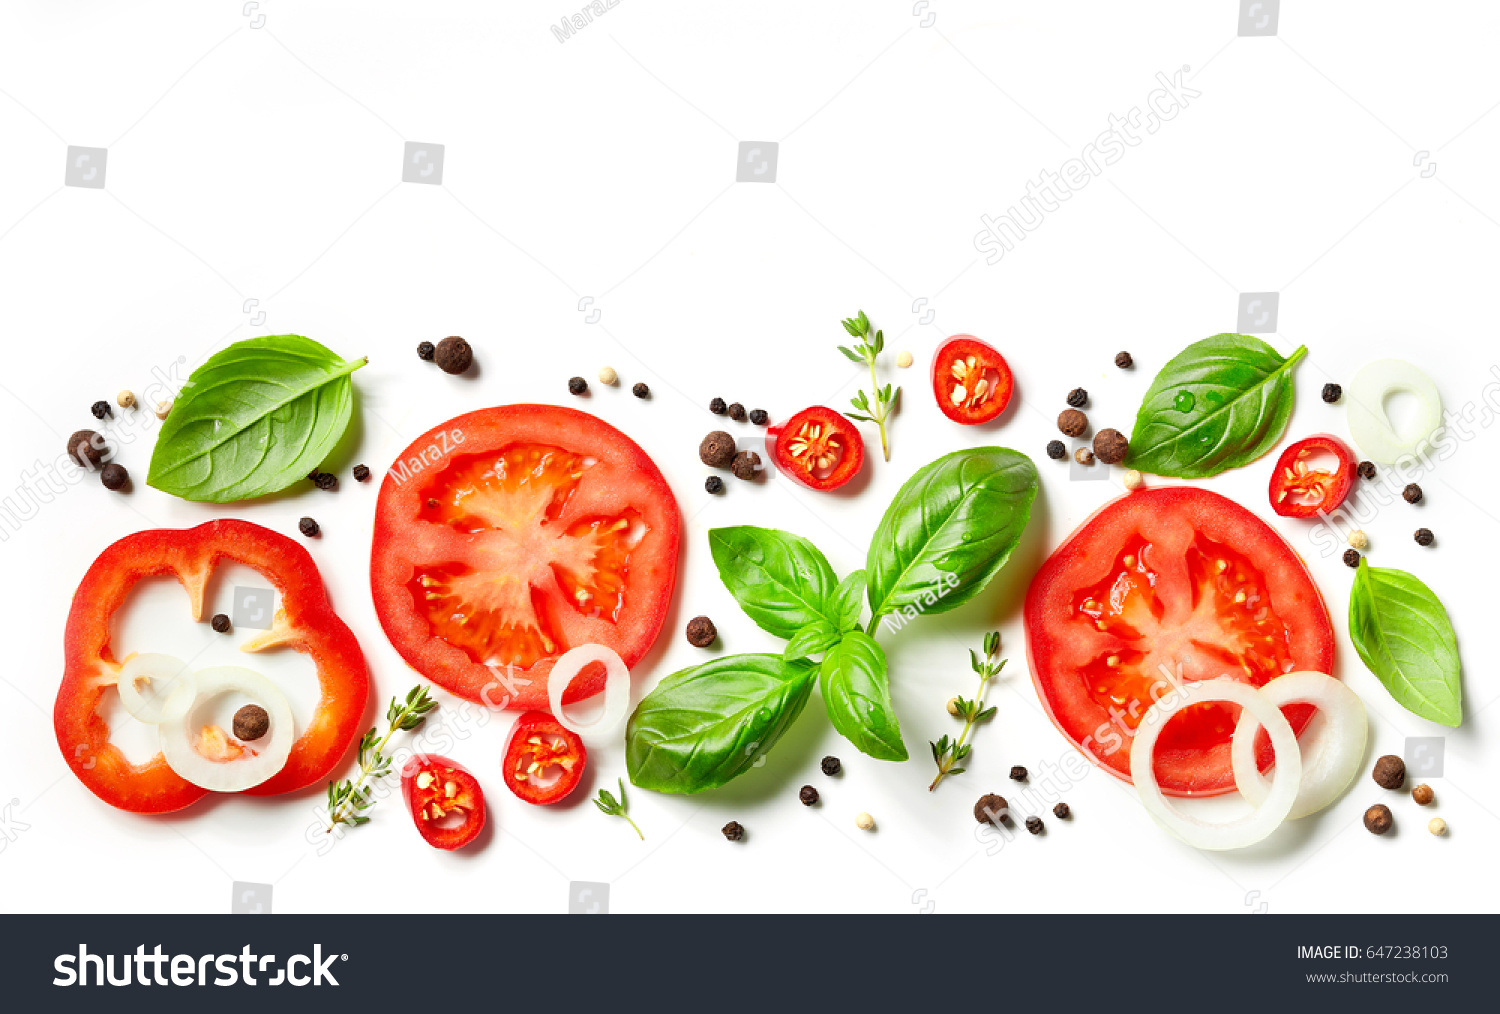 fresh vegetables, herbs and spices isolated on white background #647238103